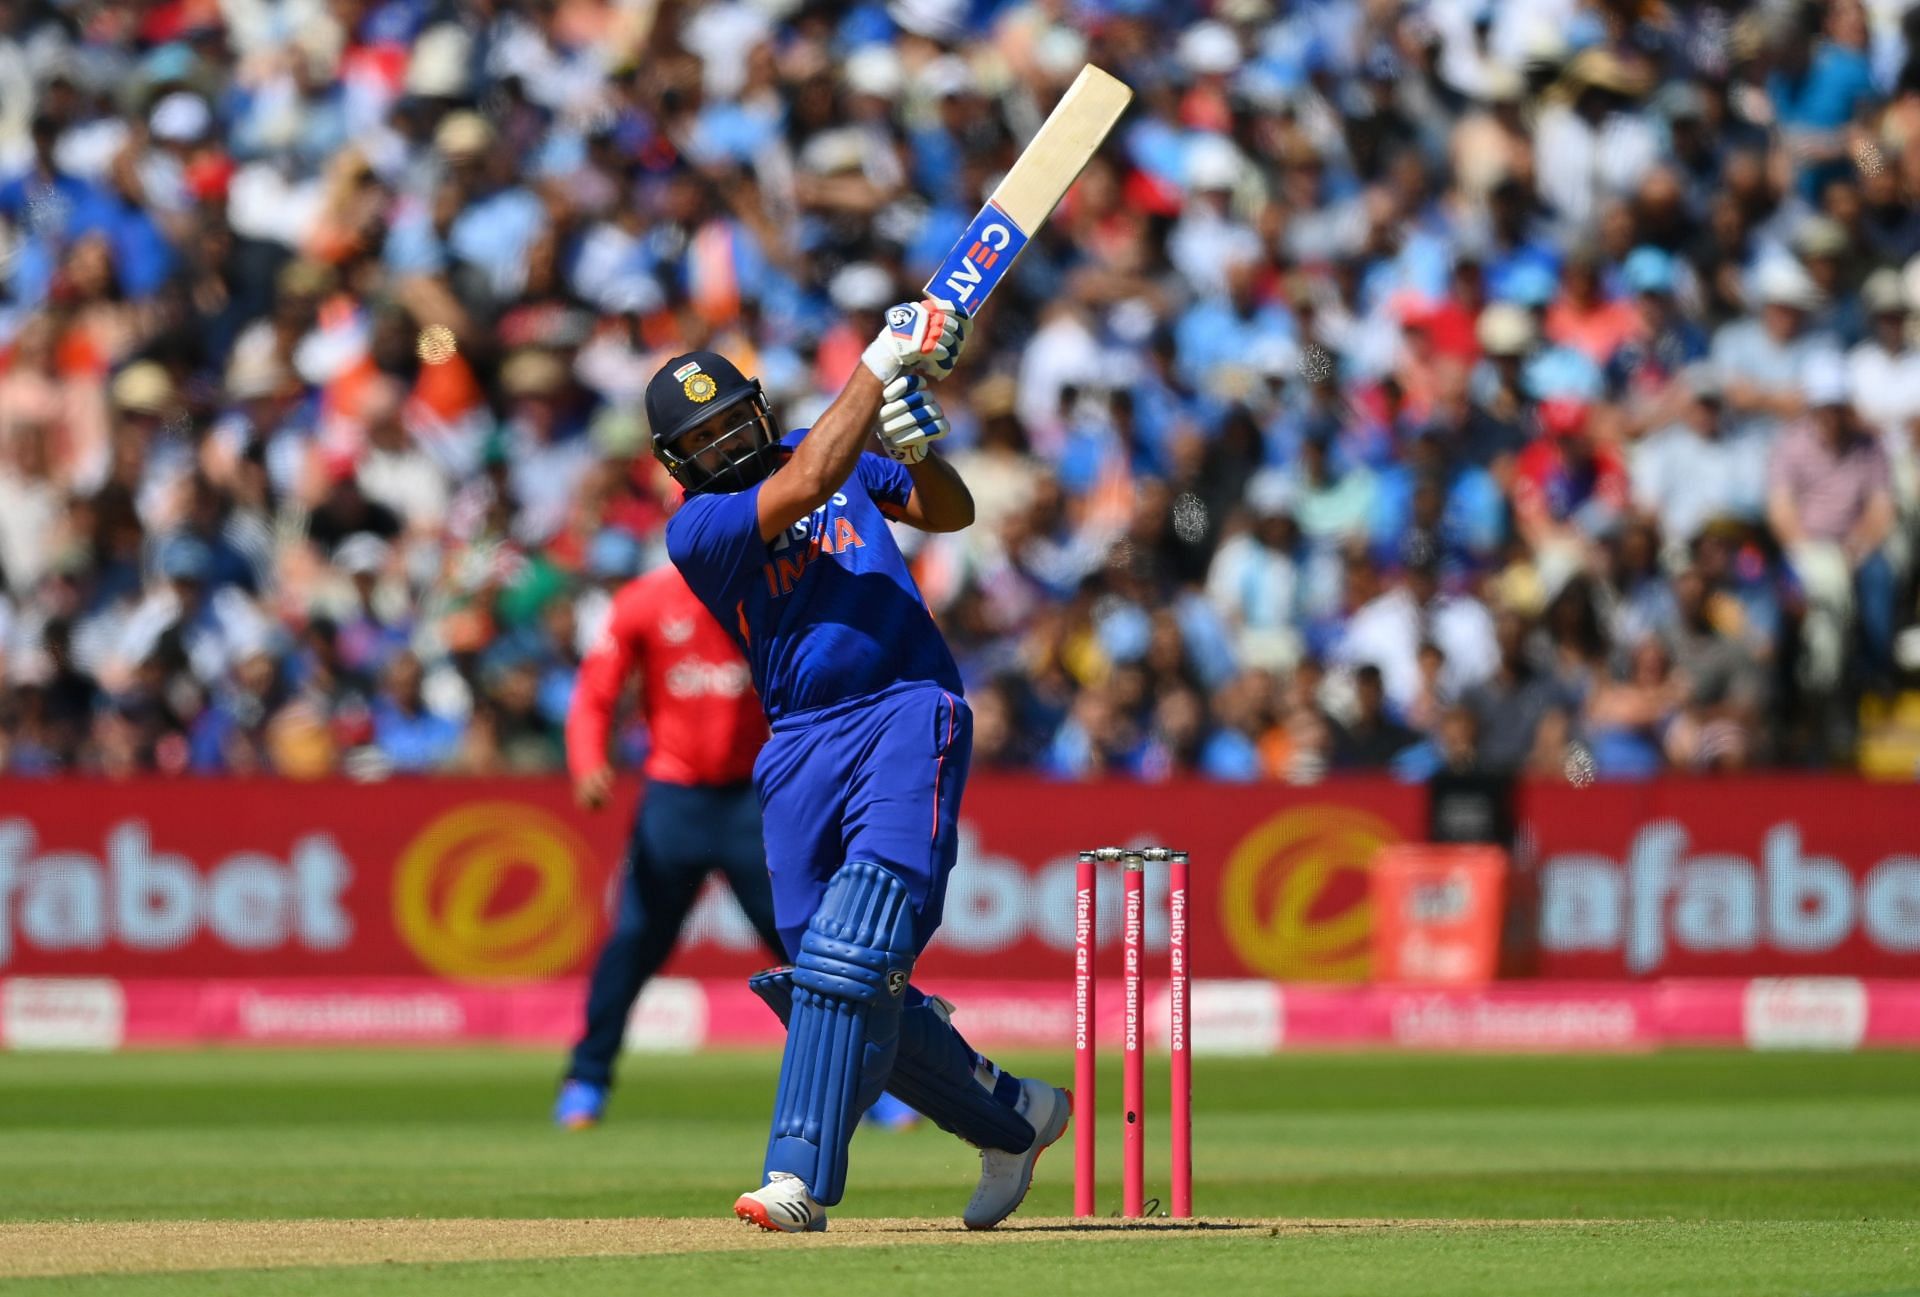 Rohit smacked three fours and two sixes in his 127th T20I match (Image: Getty)